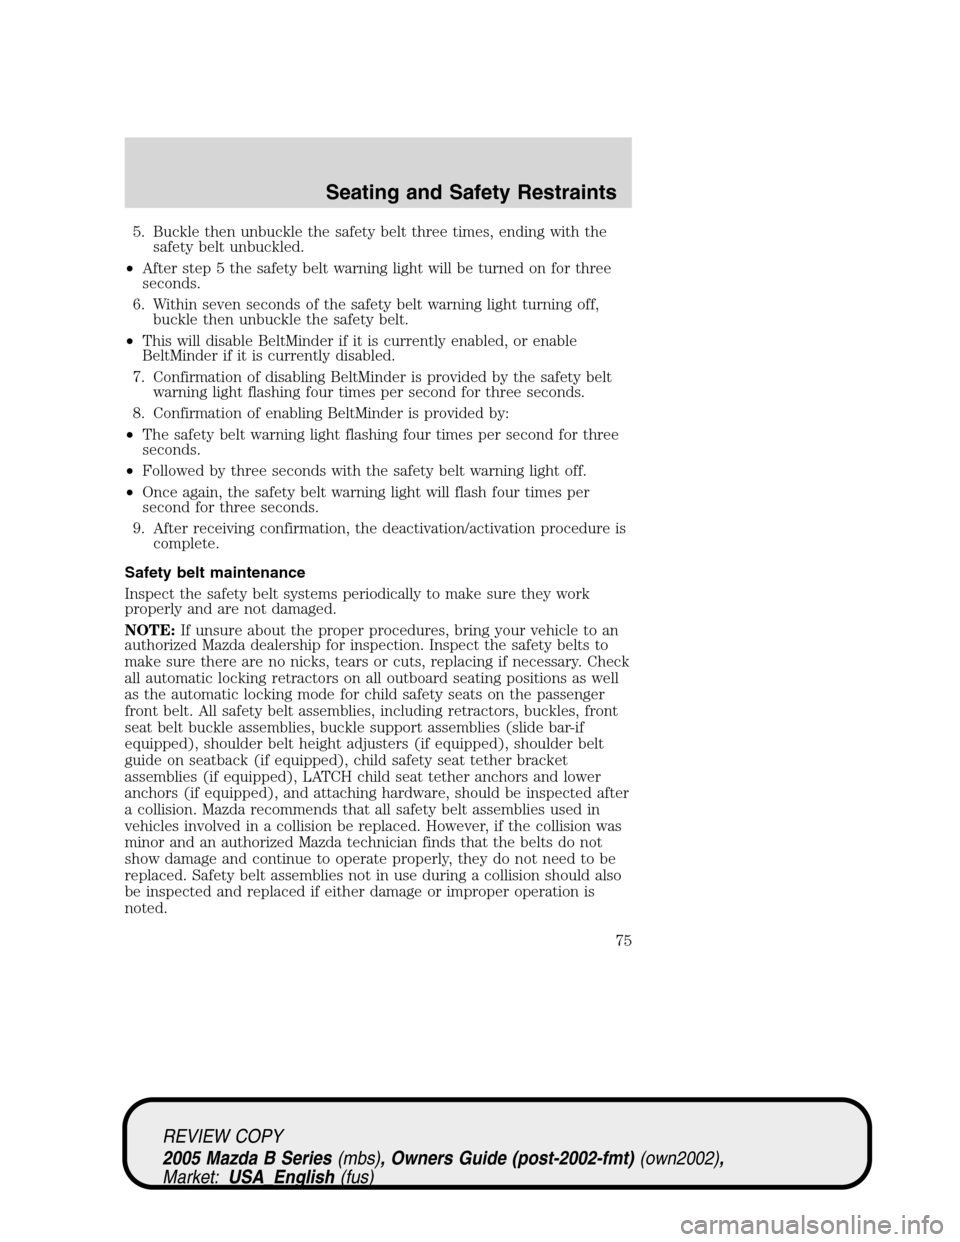 MAZDA MODEL B2300 TRUCK 2005  Owners Manual (in English) 5. Buckle then unbuckle the safety belt three times, ending with the
safety belt unbuckled.
•After step 5 the safety belt warning light will be turned on for three
seconds.
6. Within seven seconds o